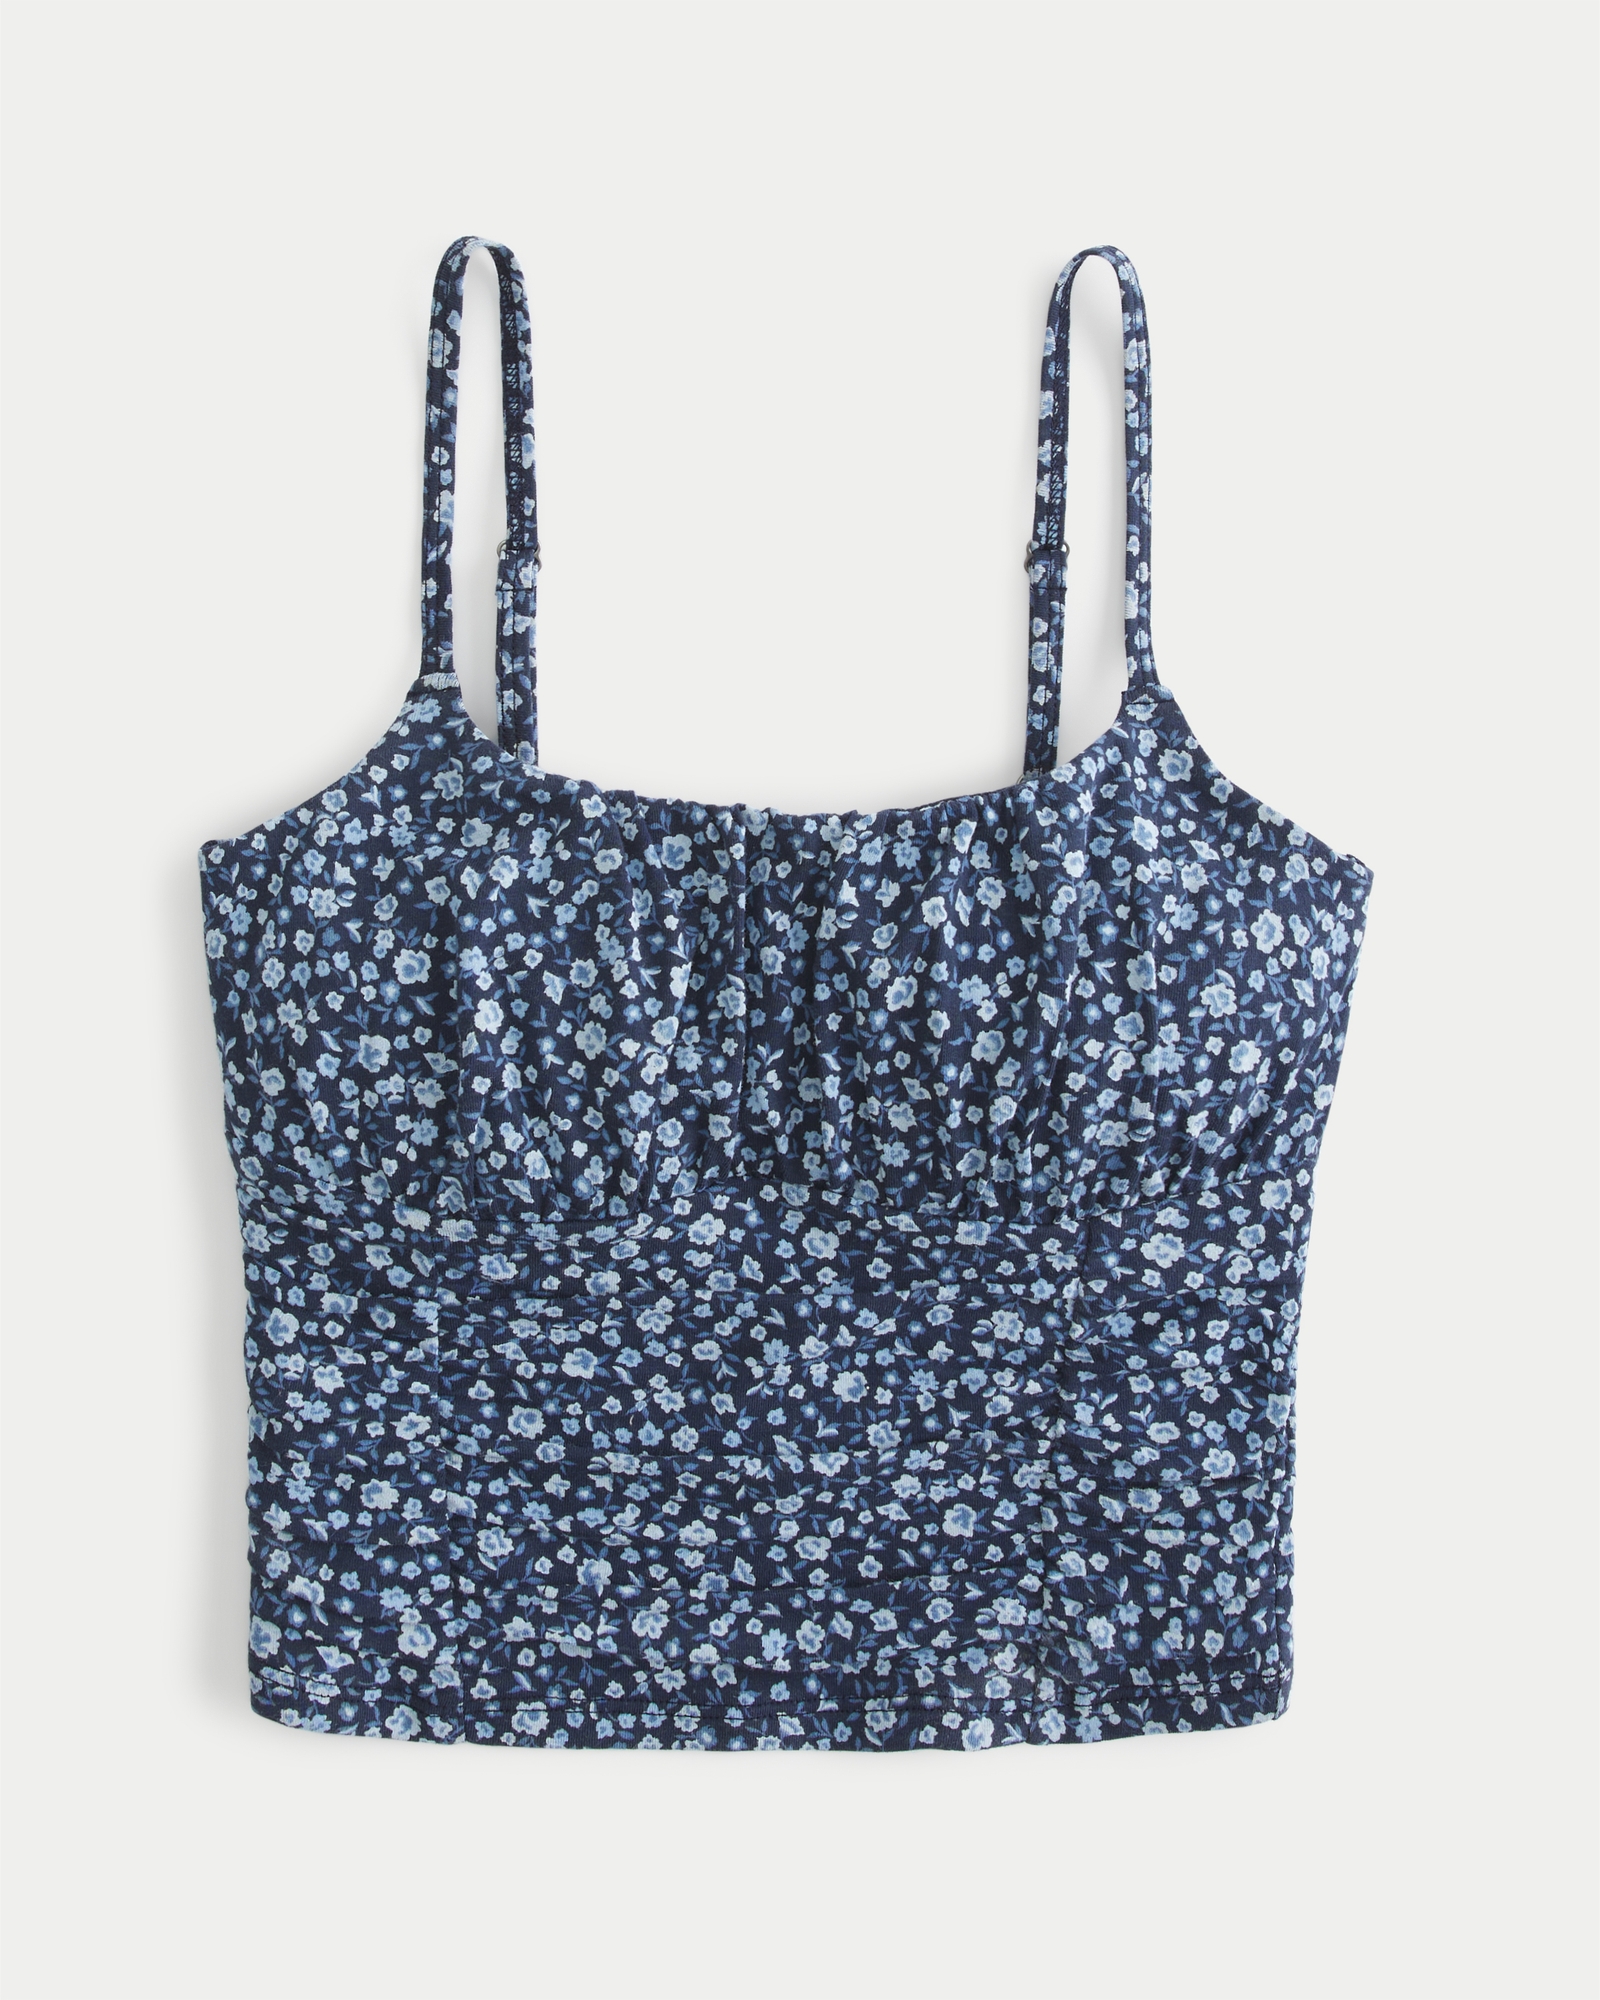 Hollister Floral Stretchy Ruched Top Multi - $10 (71% Off Retail) New With  Tags - From Nicole